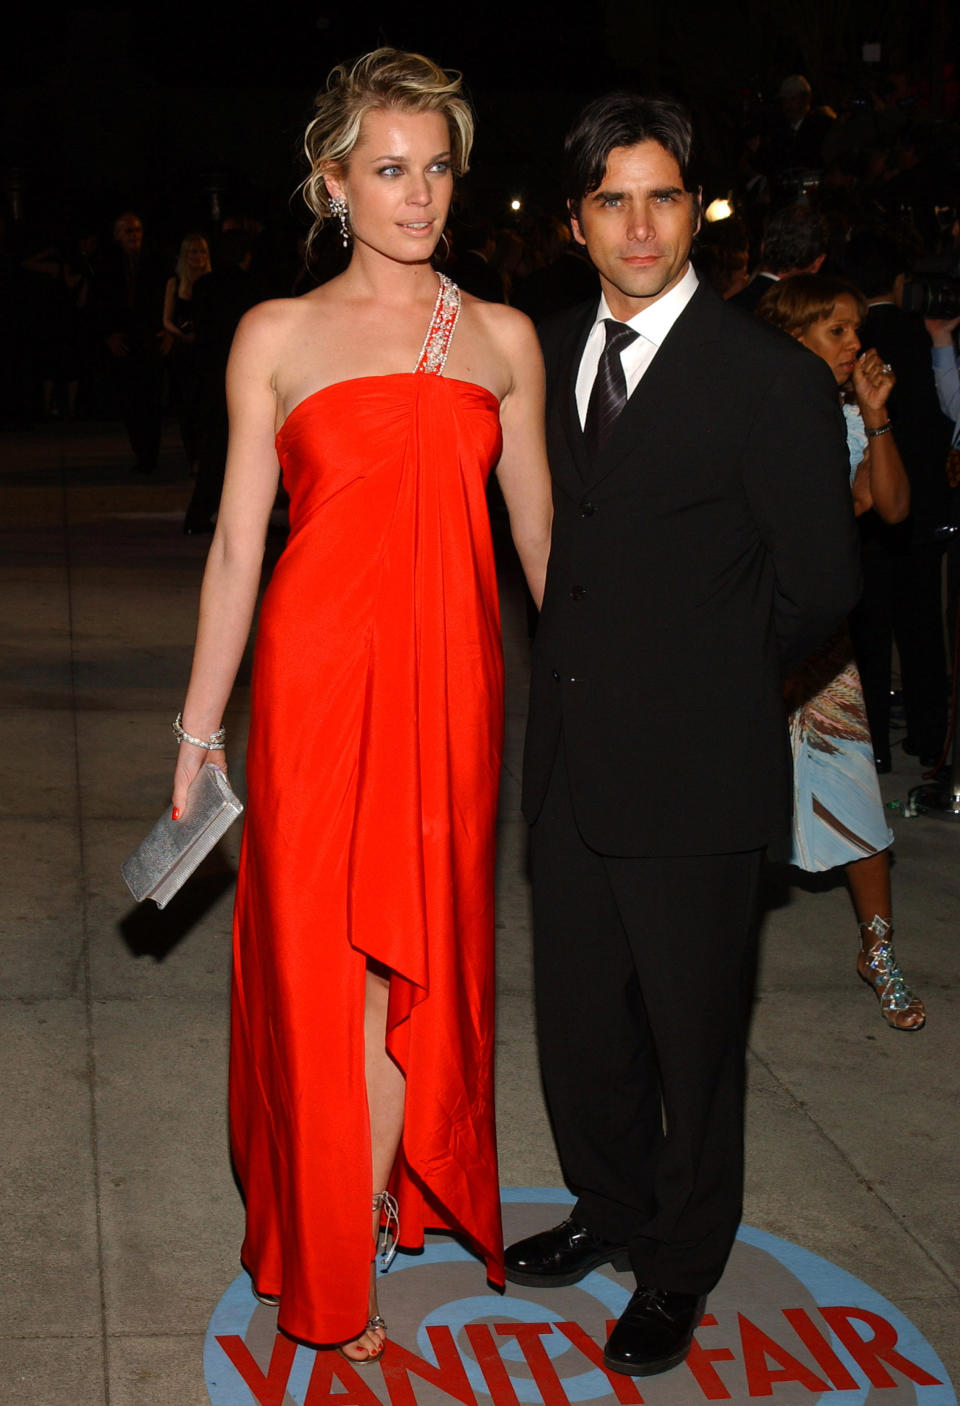 Rebecca Romijn and John Stamos in February 2004. (Photo: Getty Images)